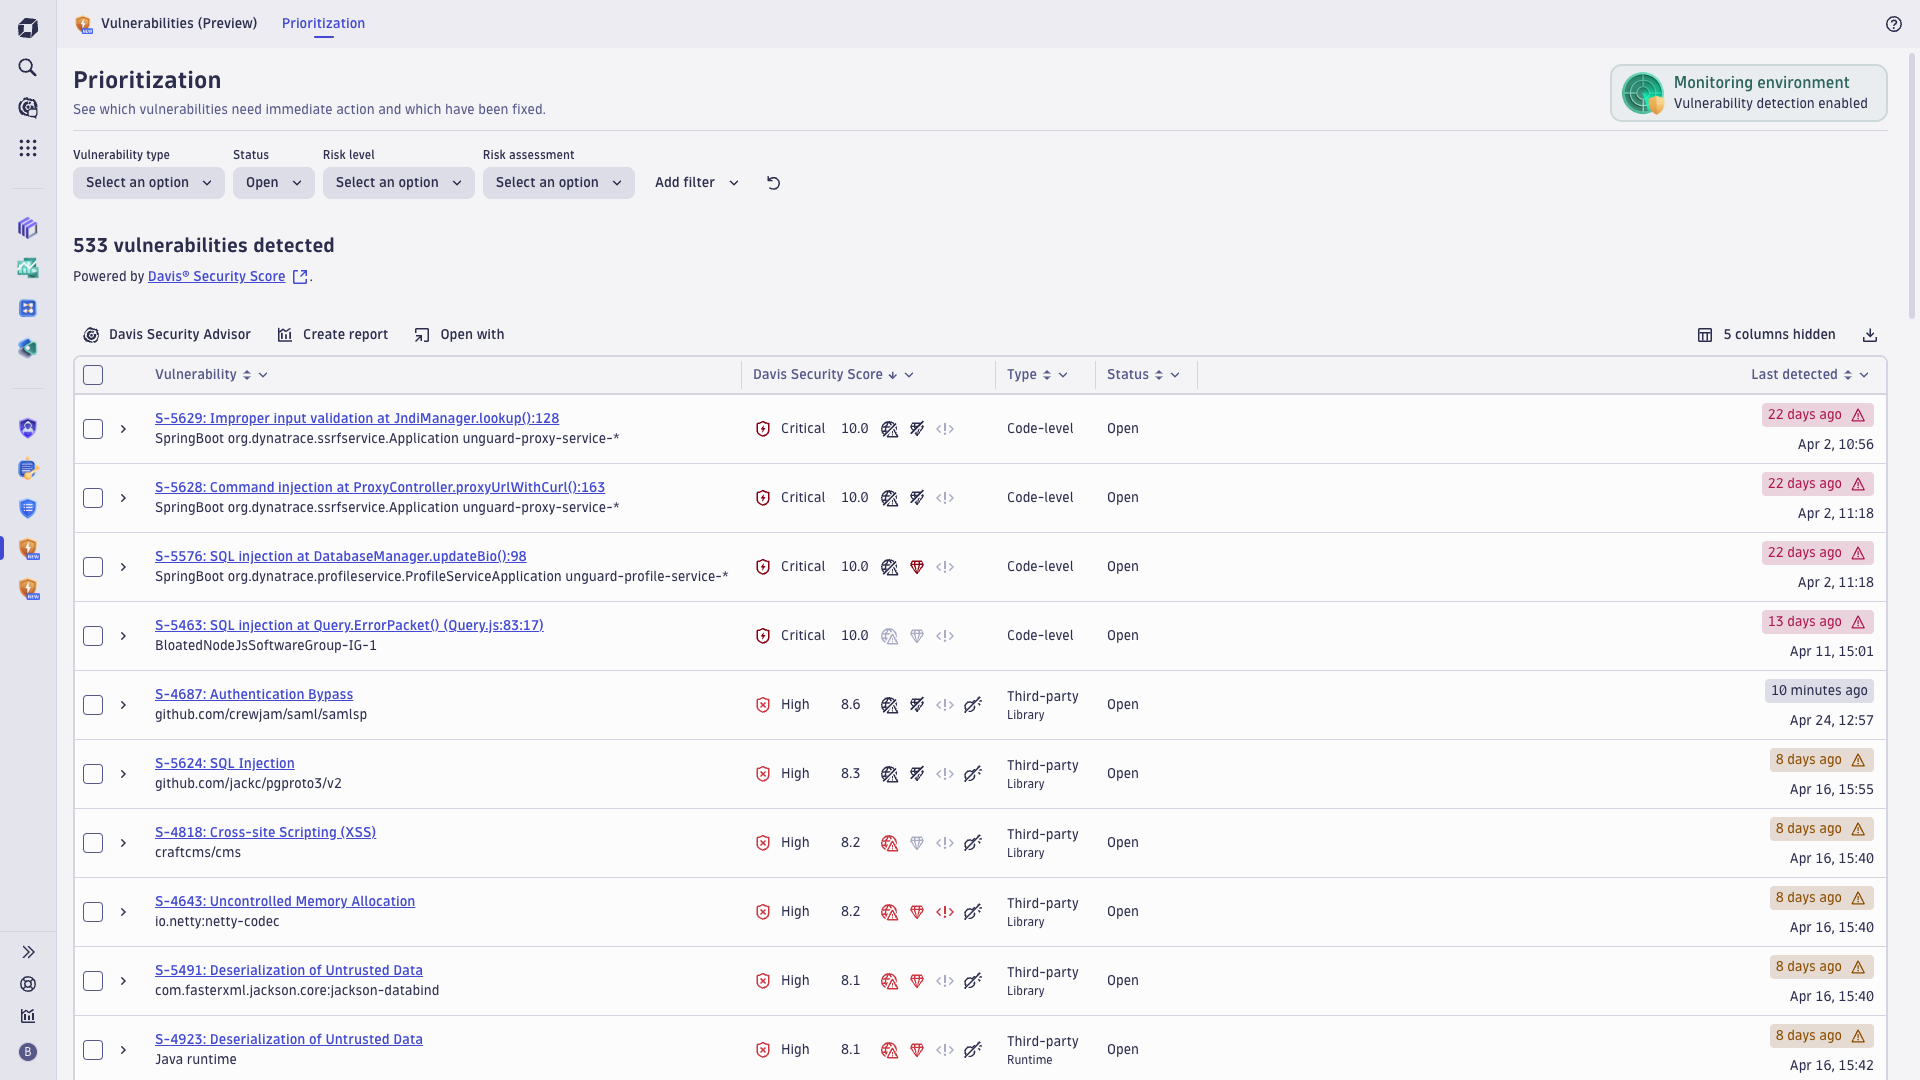 The prioritization page shows the overview of vulnerabilities in your environment in real time while adding context and automated risk assessments.